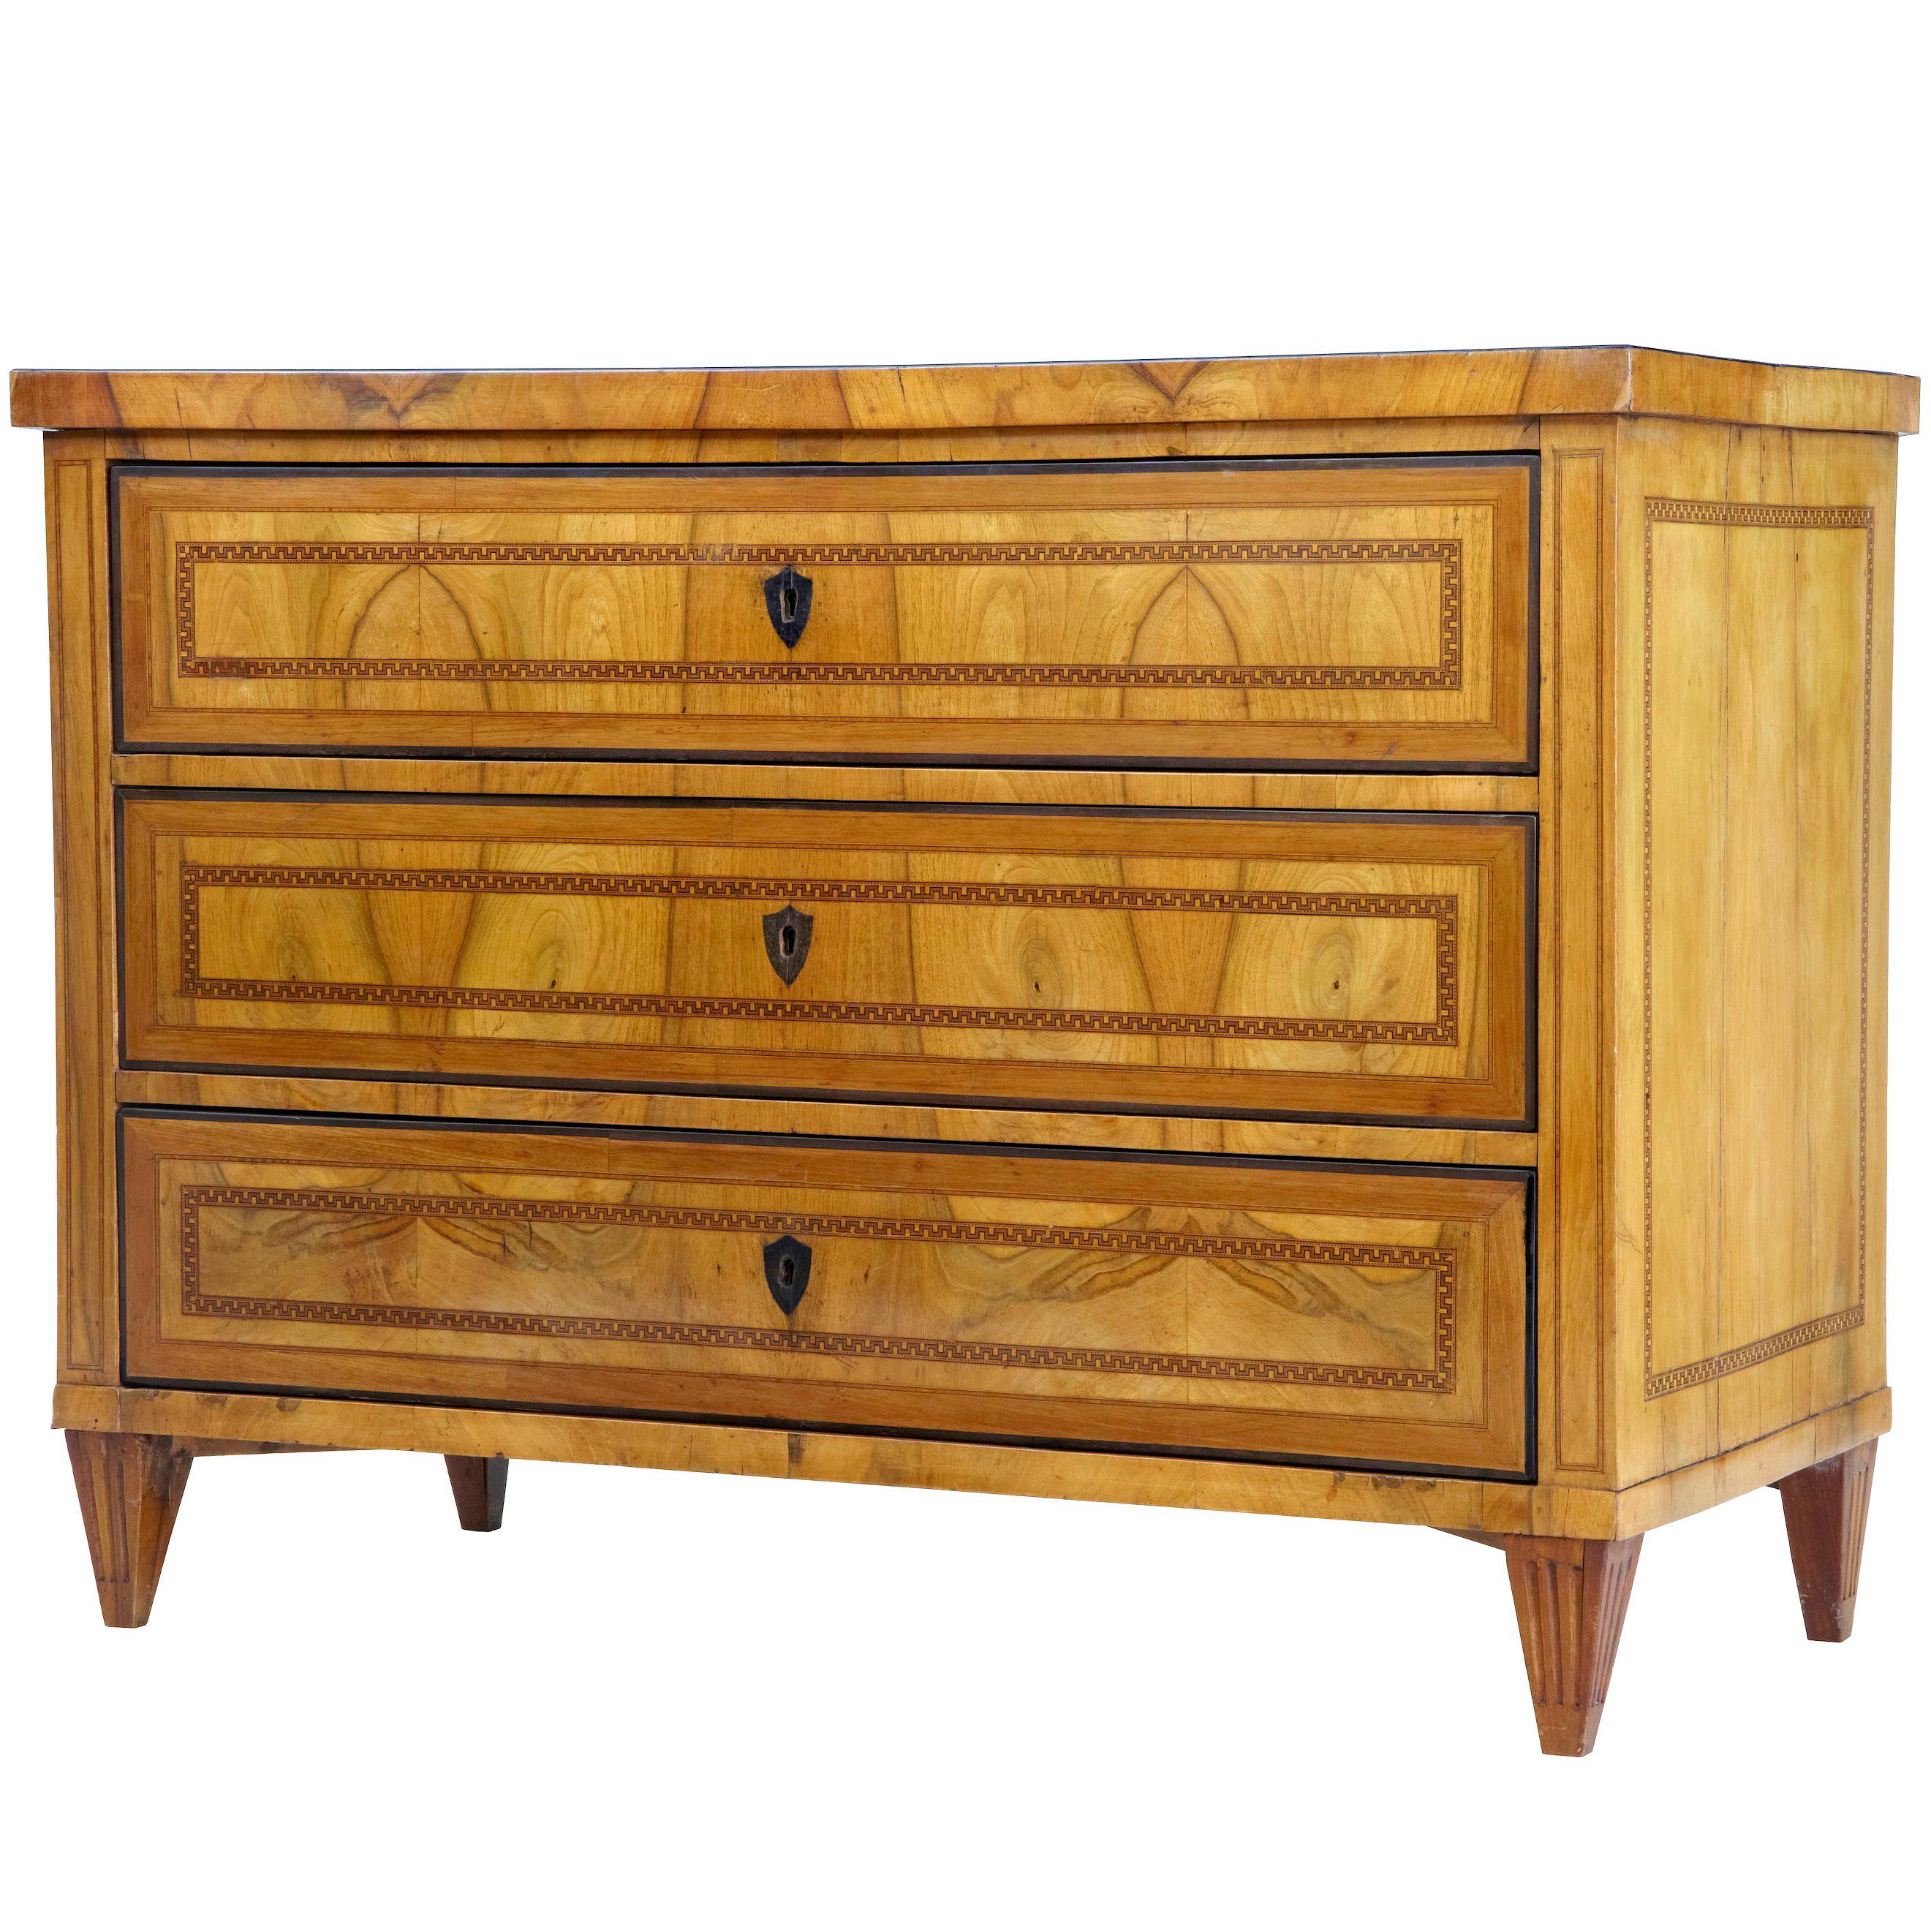 Superb Early 19th Century Continental Inlaid Walnut Commode Chest of Drawers